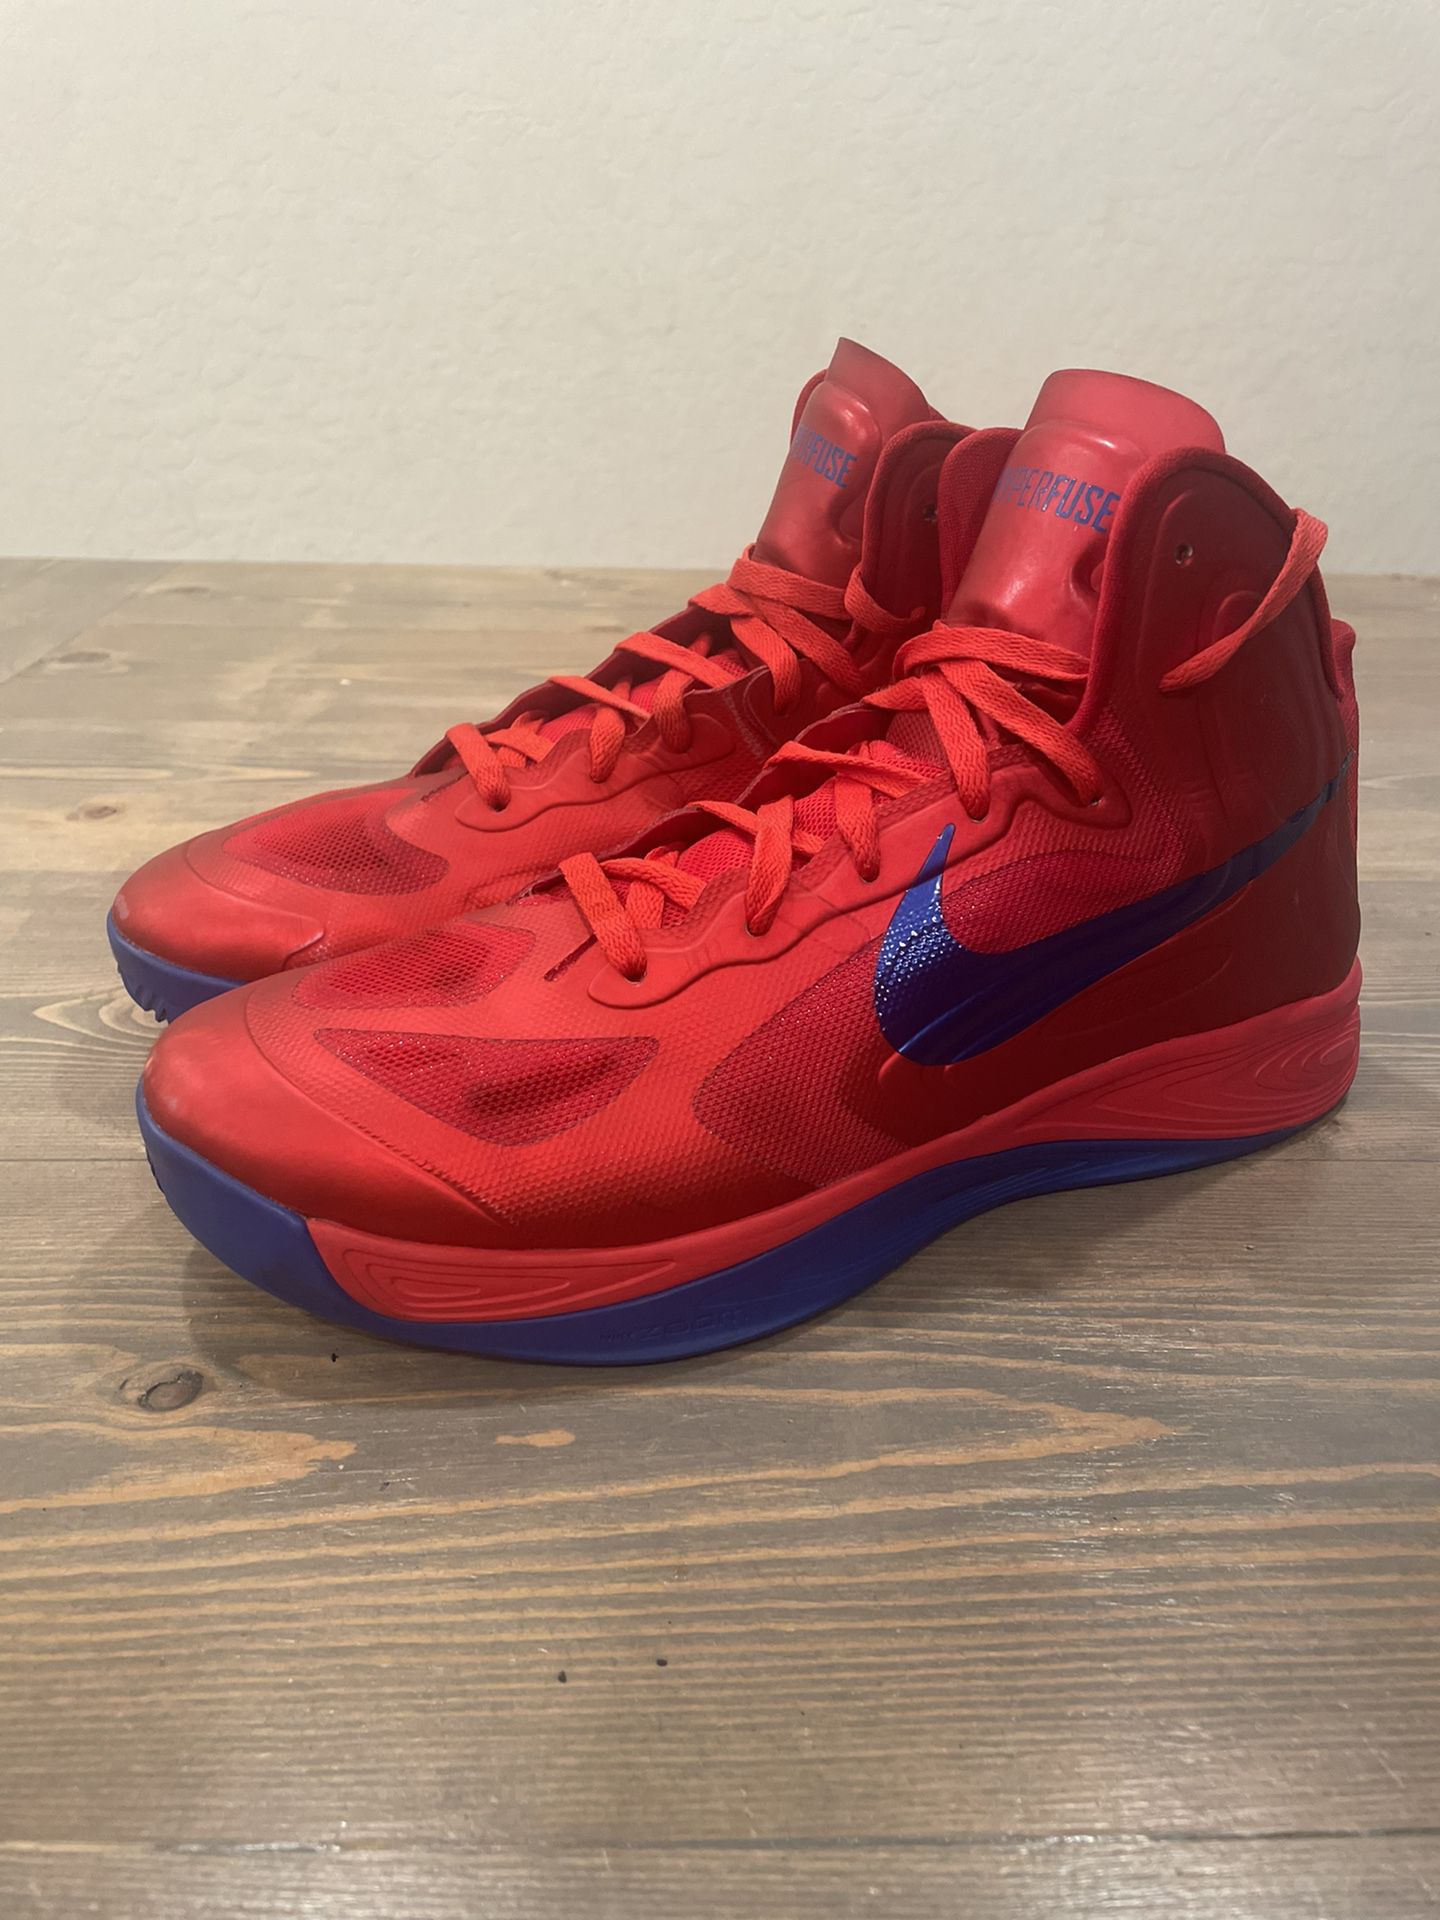 Hyperfuse Basketball Shoes Sz 11 for Sale in Phoenix, AZ OfferUp